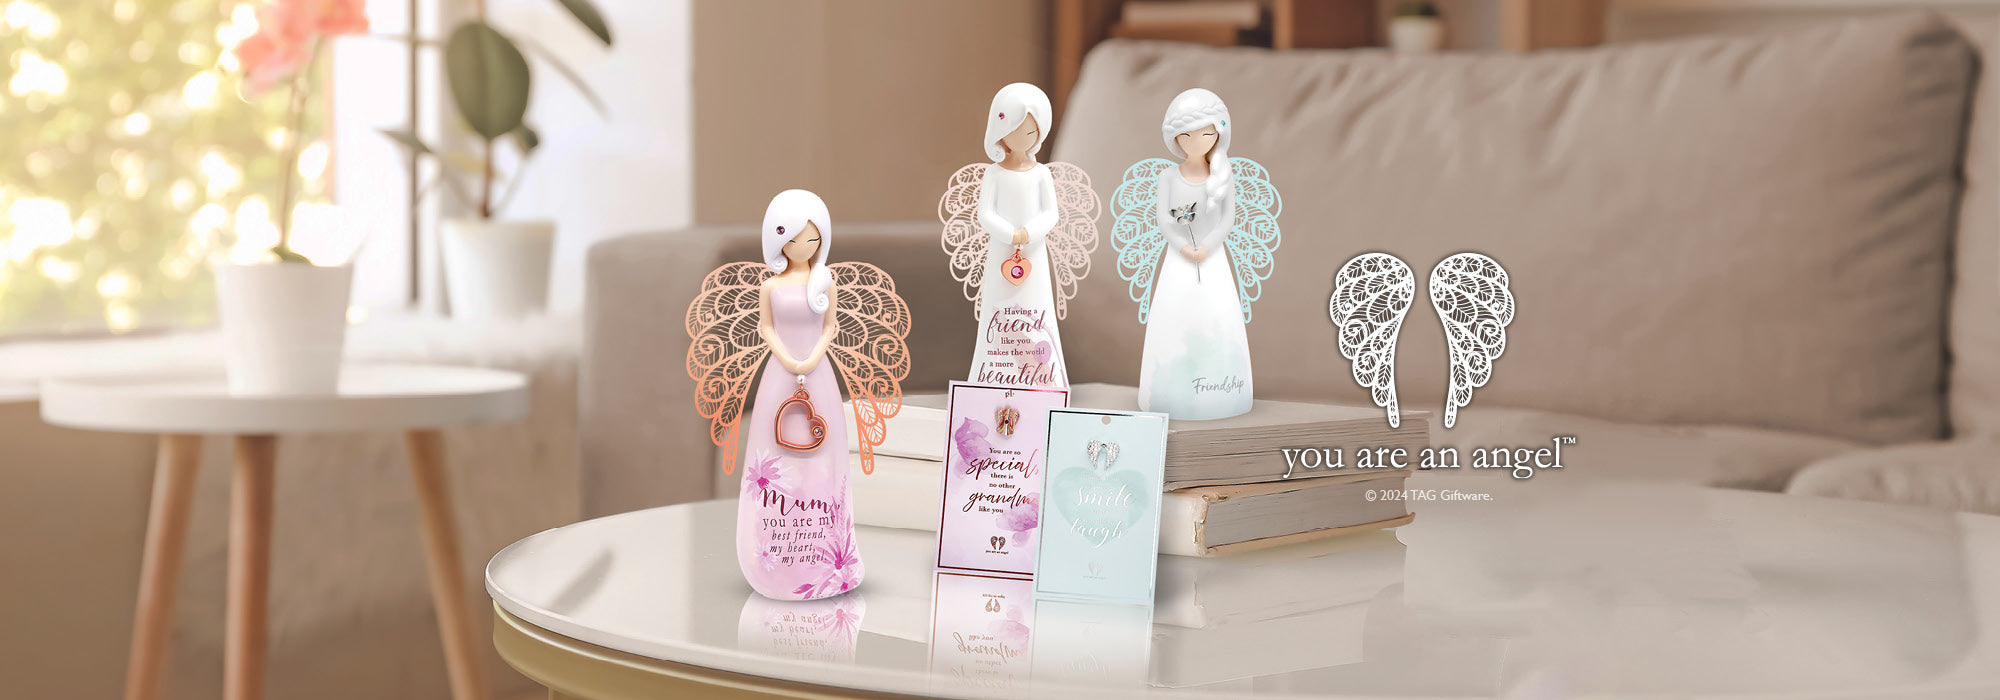 You Are An Angel collection of angel figurines and pin cards | Enesco Gift Shop